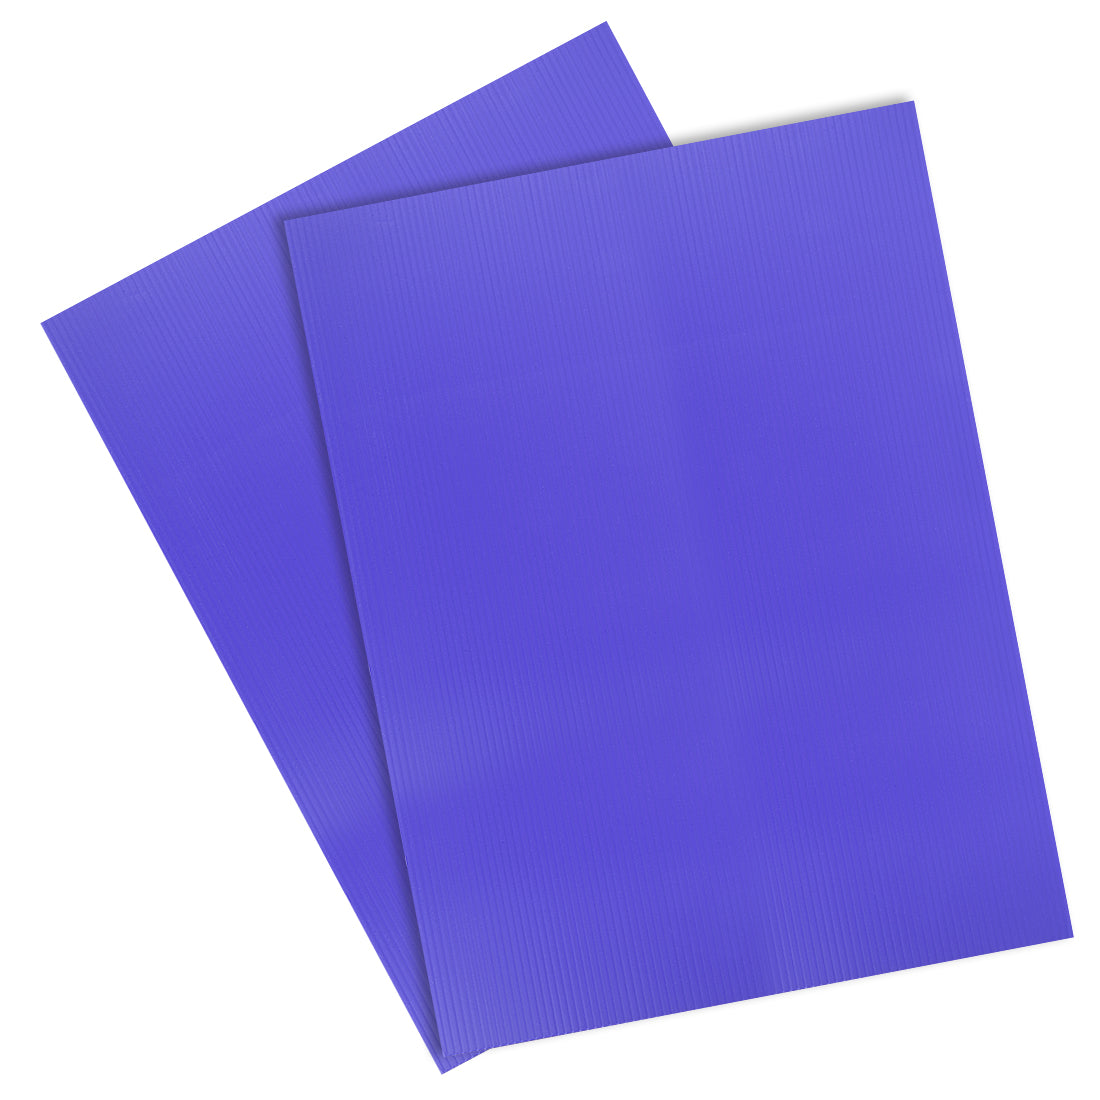 Uxcell Uxcell Corrugated Plastic Sheets,3mm Blue Blank Yard Lawn Signs,12Inch x 16Inch 2pcs